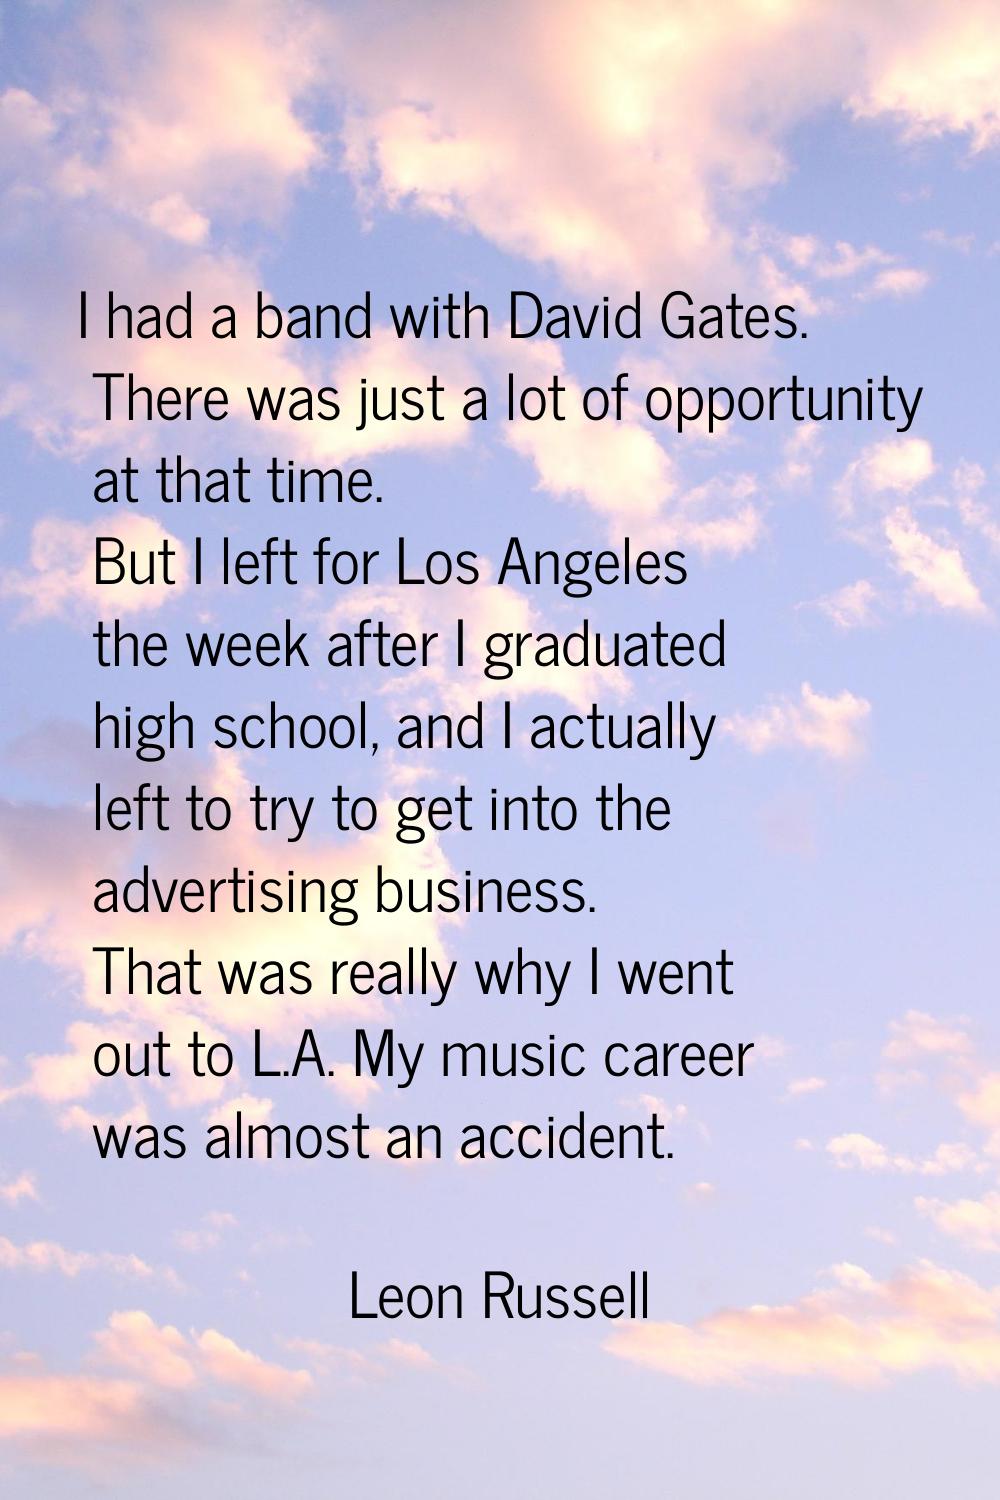 I had a band with David Gates. There was just a lot of opportunity at that time. But I left for Los